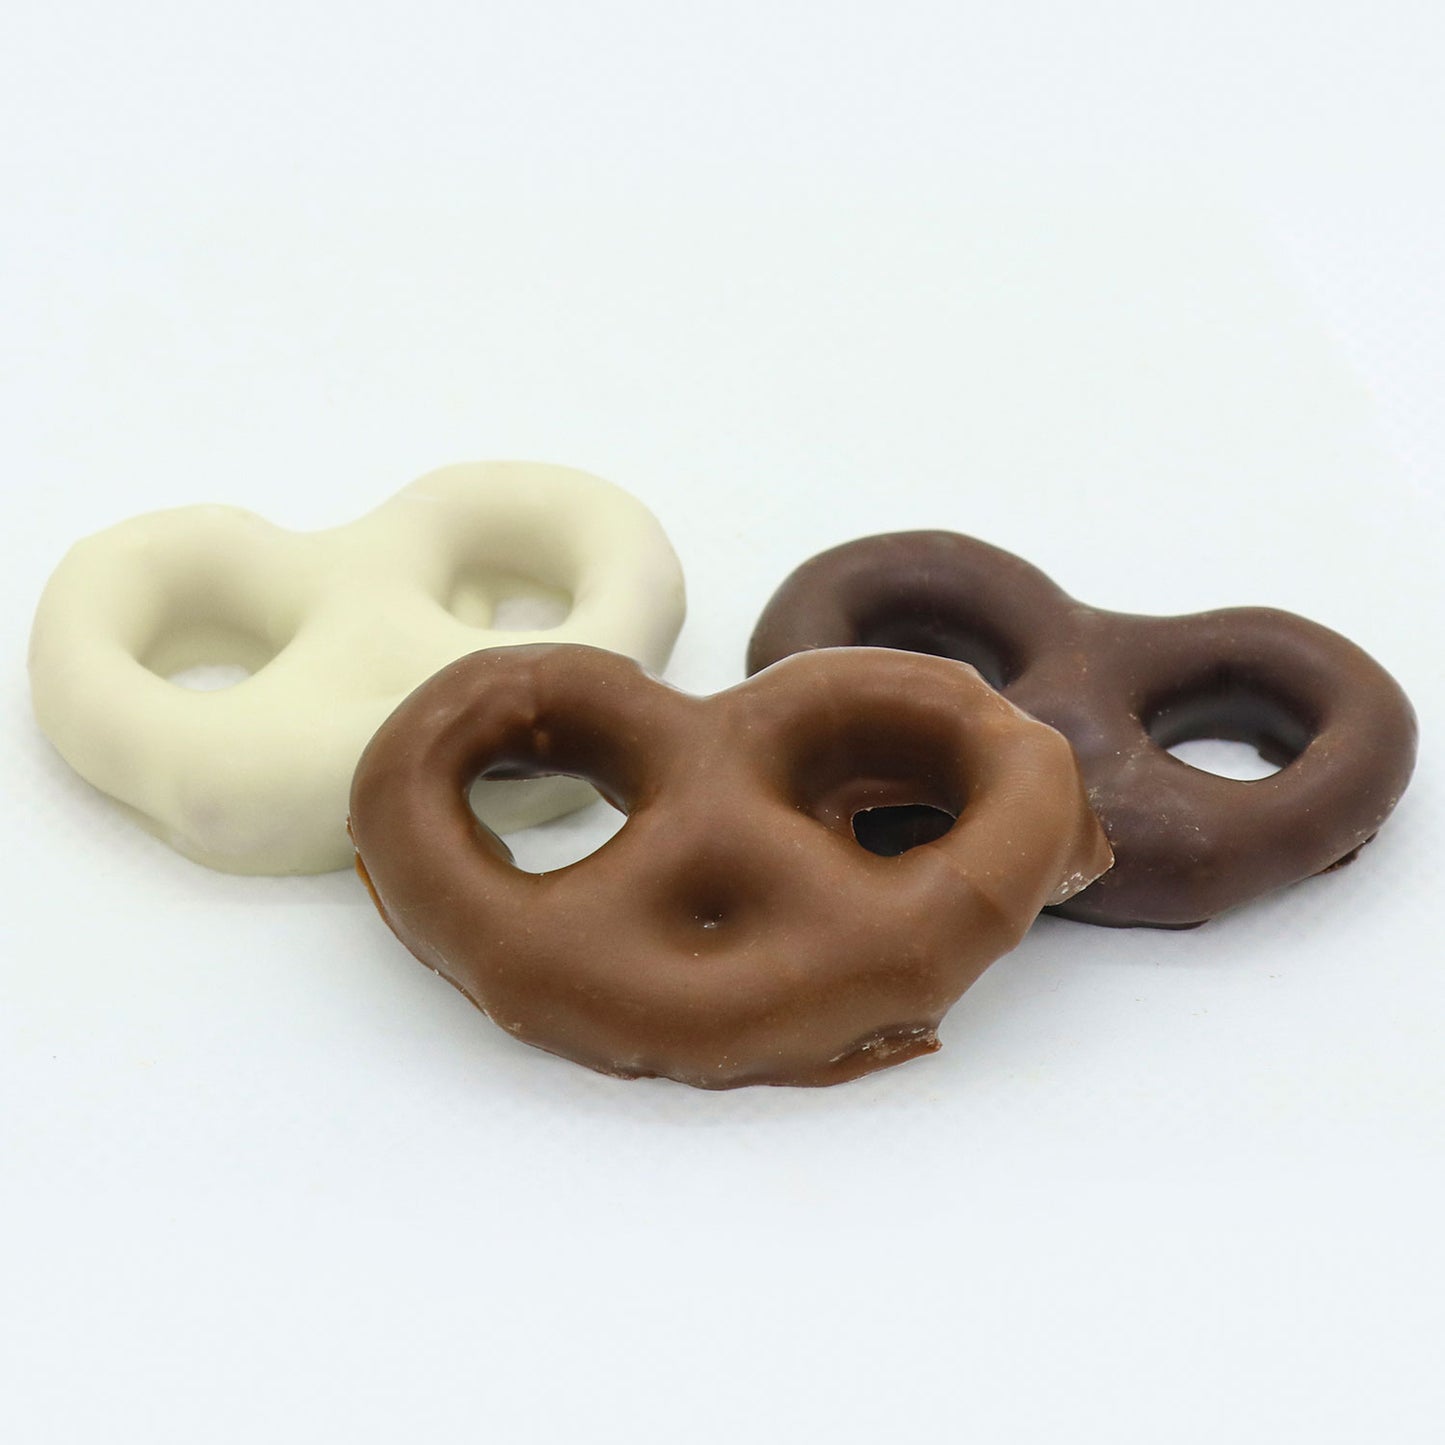 Chocolate Covered Pretzels - Small